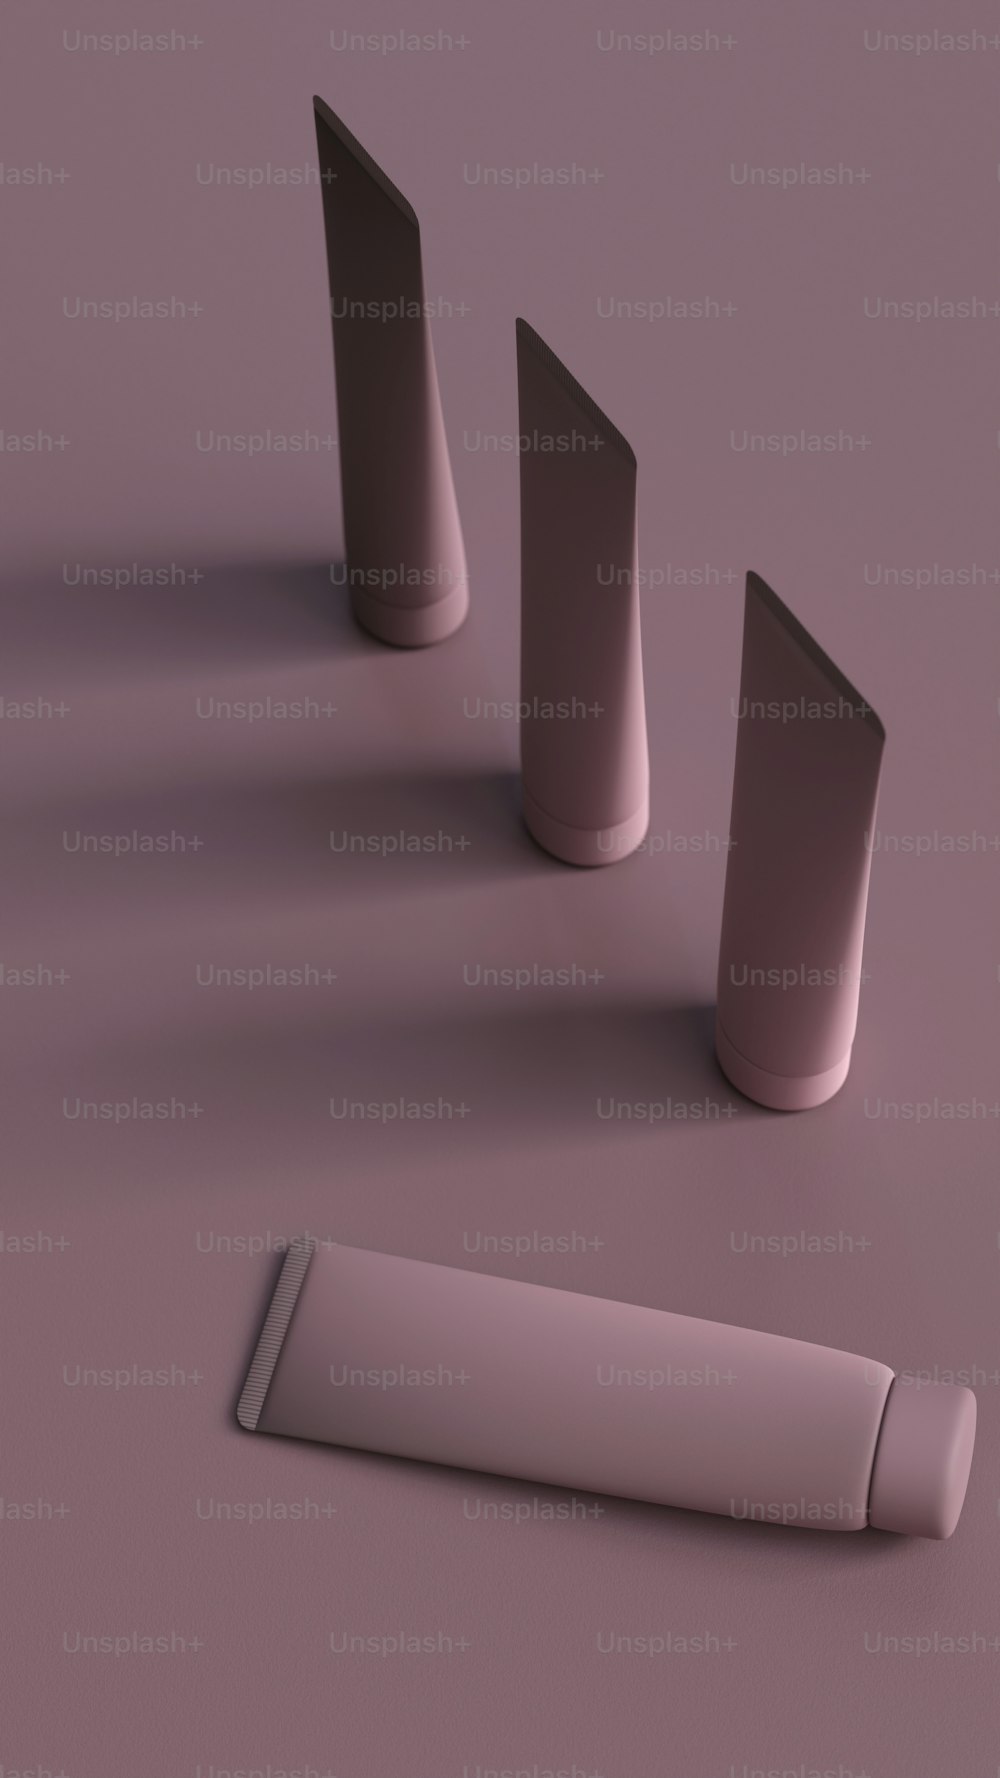 a group of three cylindrical objects on a purple surface